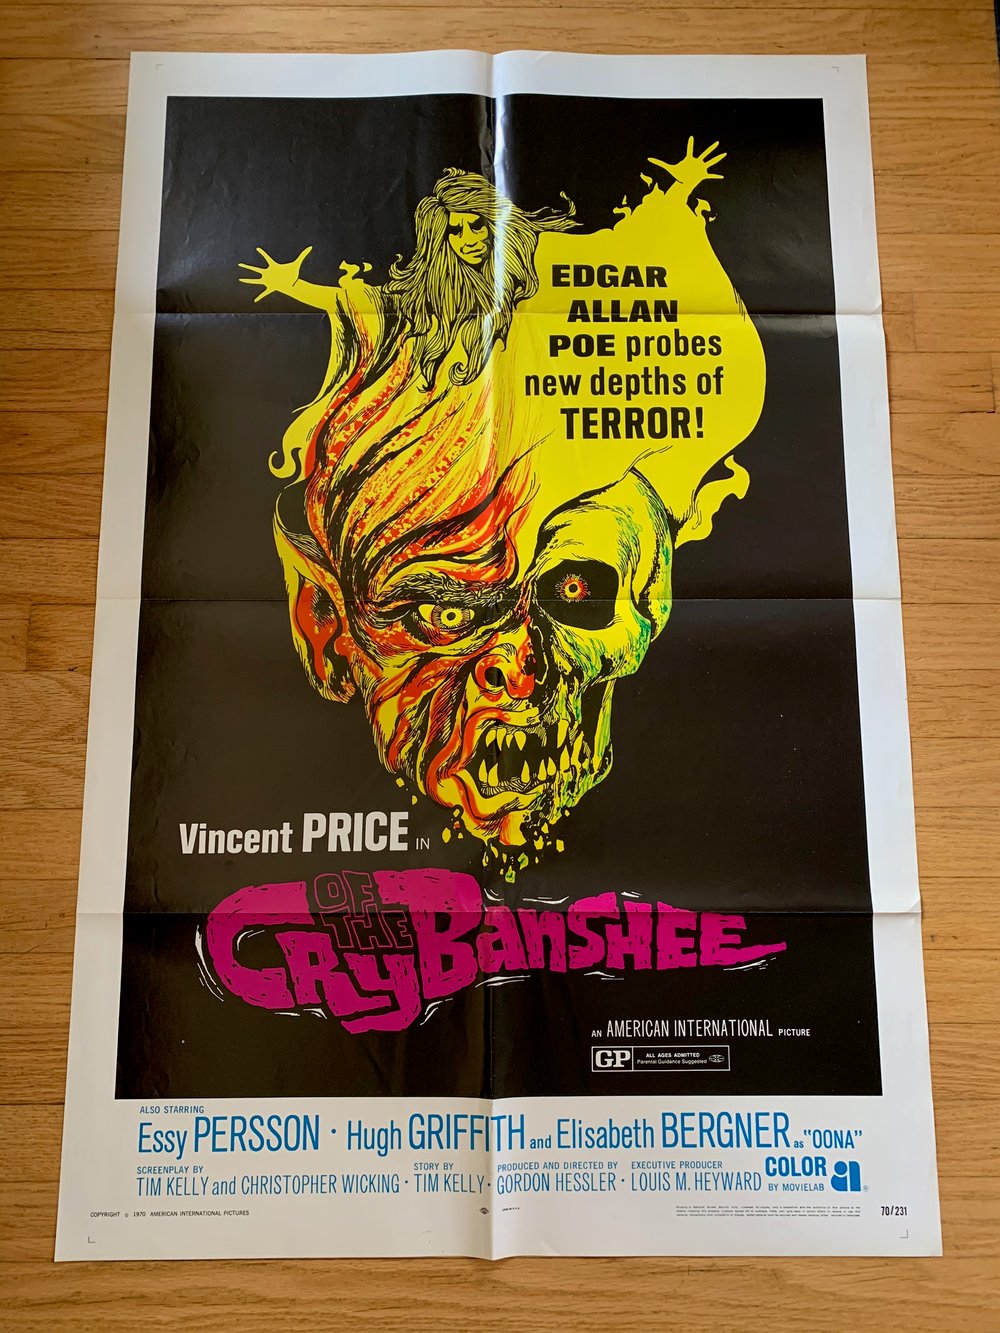 1970 CRY OF THE BANSHEE Original U.S. One Sheet Movie Poster